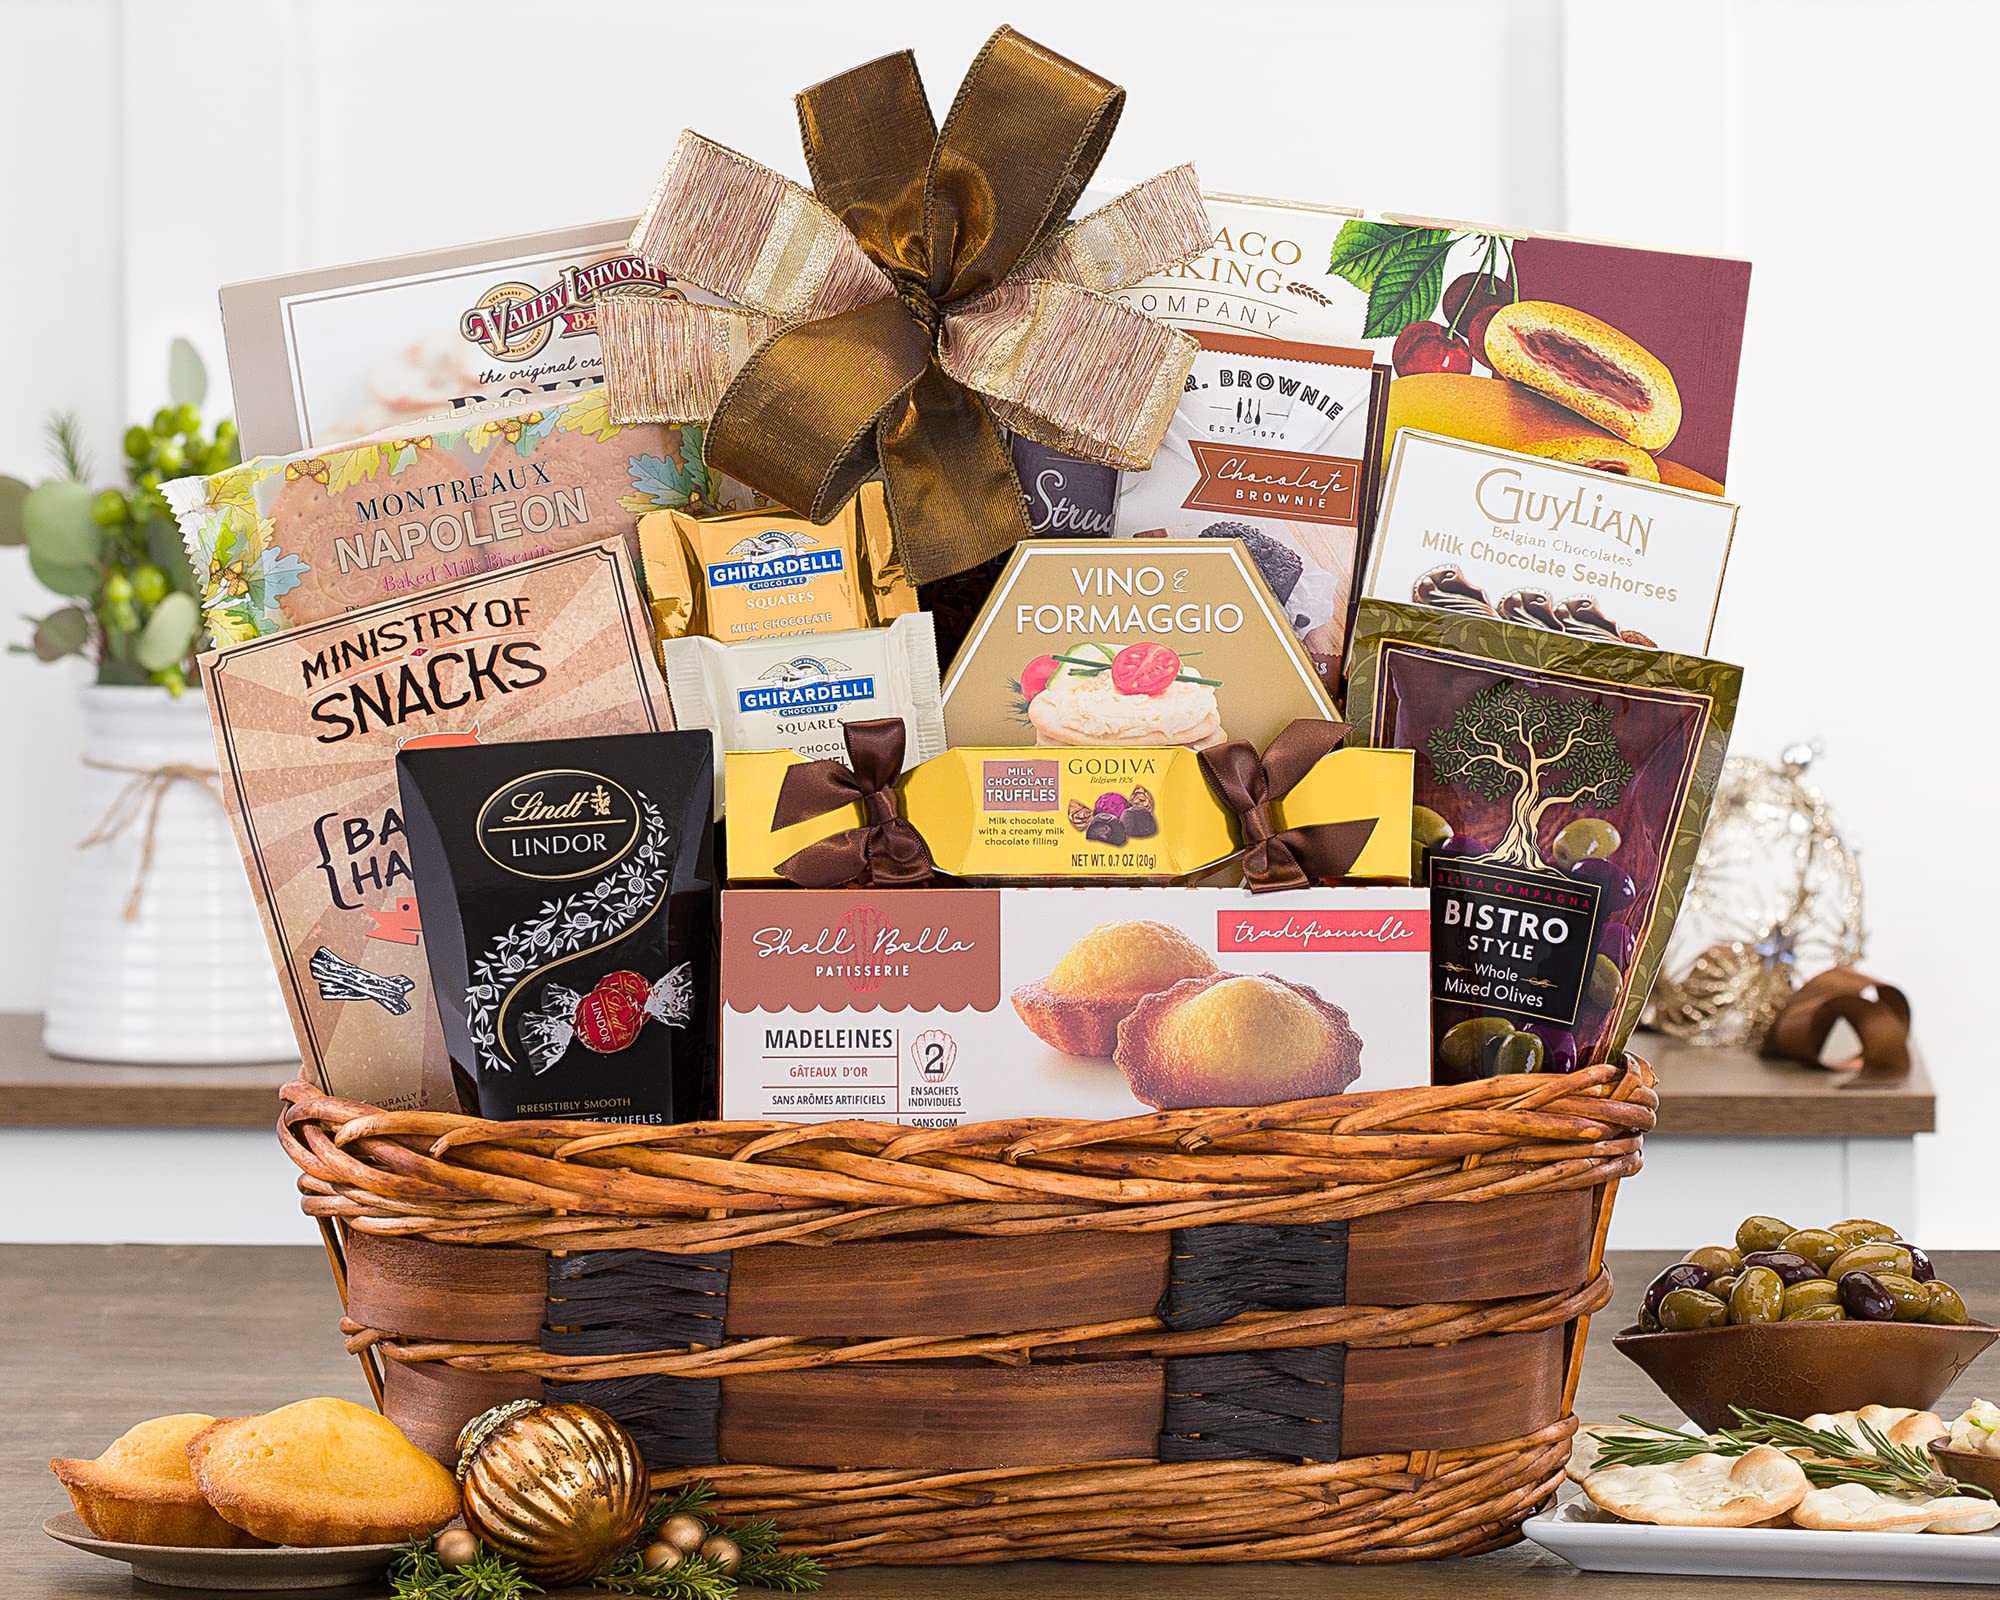 Five Holiday Food Gift Ideas | Christmas Gift Guide | PBS Food